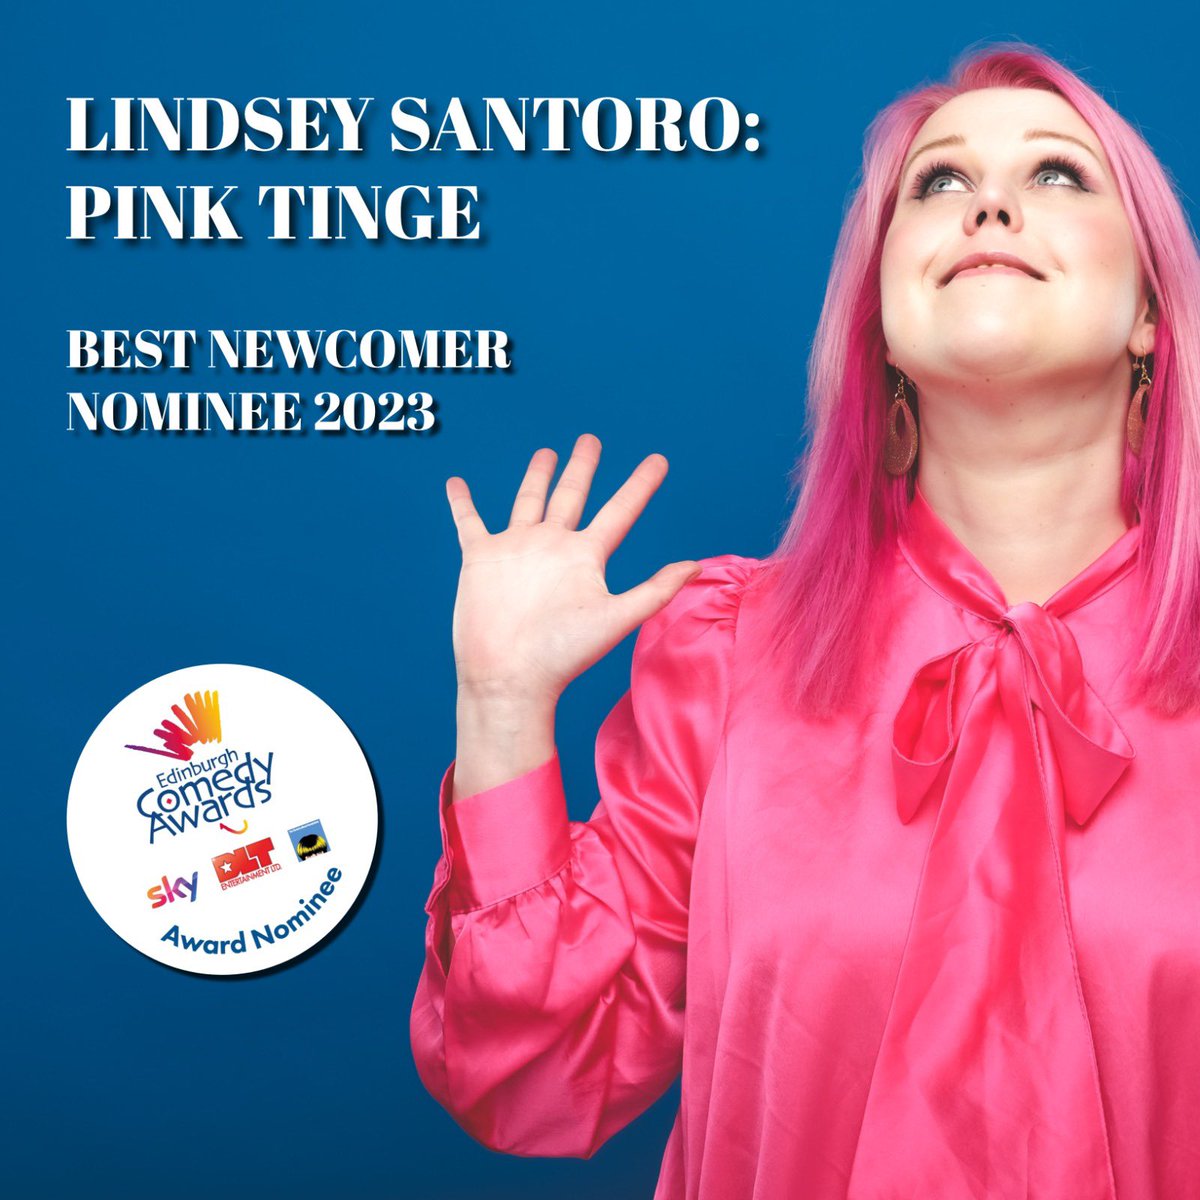 Wow wow! This is insane! 

I’m nominated for Best Newcomer @edfringe 2023!
@ComedyAwards 
⭐️⭐️⭐️⭐️⭐️🎉🎉🎉🎉🎉 
#edfringe23 #fillyerboots 
I did a cry!